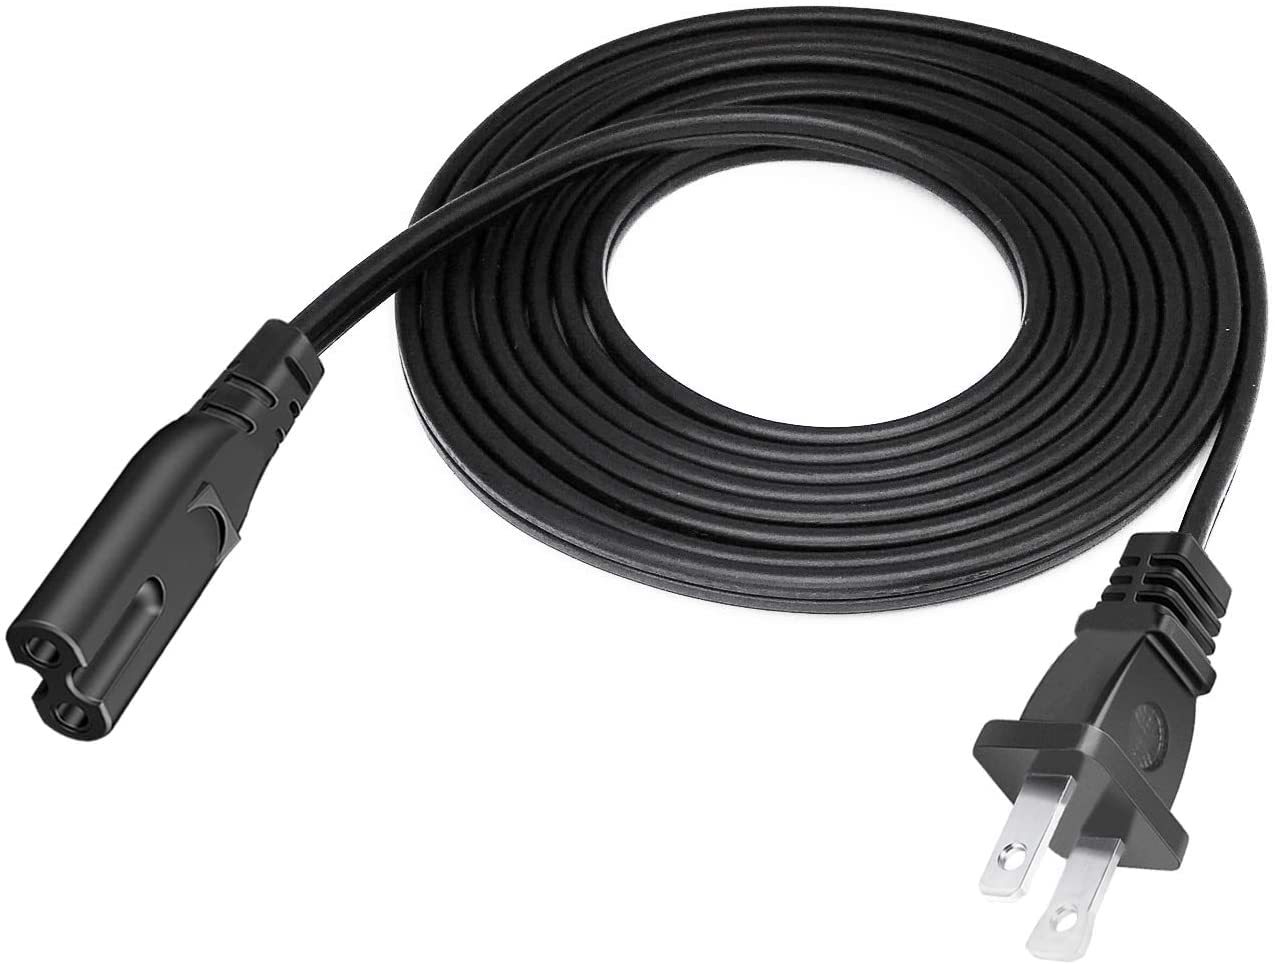 Primary image for Replacement 15FT US 2Prong AC Power Cord Cable for JVC TV EM32FL EM32T EM32TS EM